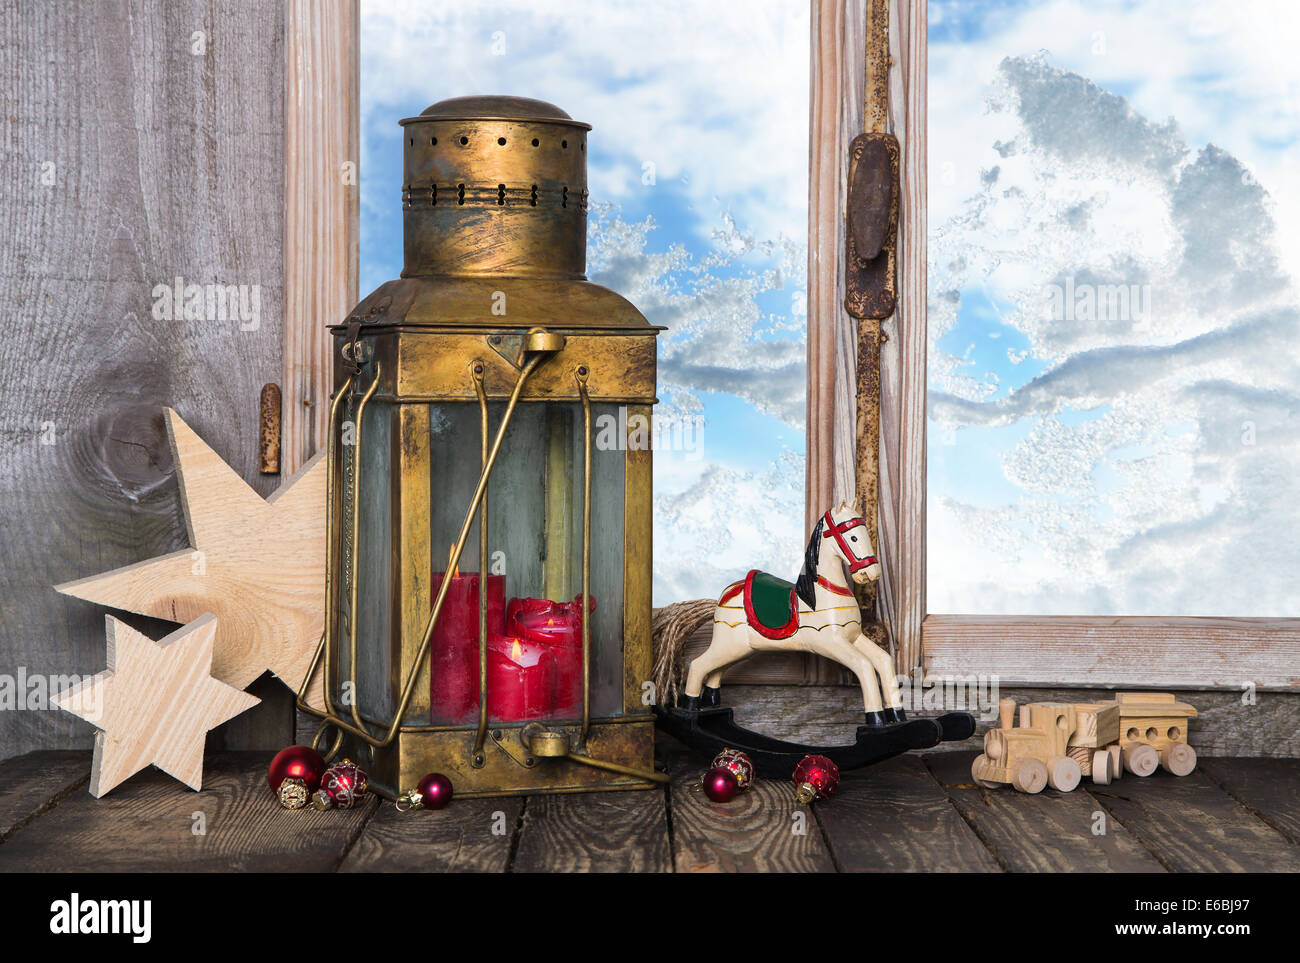 Nostalgic old christmas decoration with old toys and a old lantern with candles on the window sill. Stock Photo